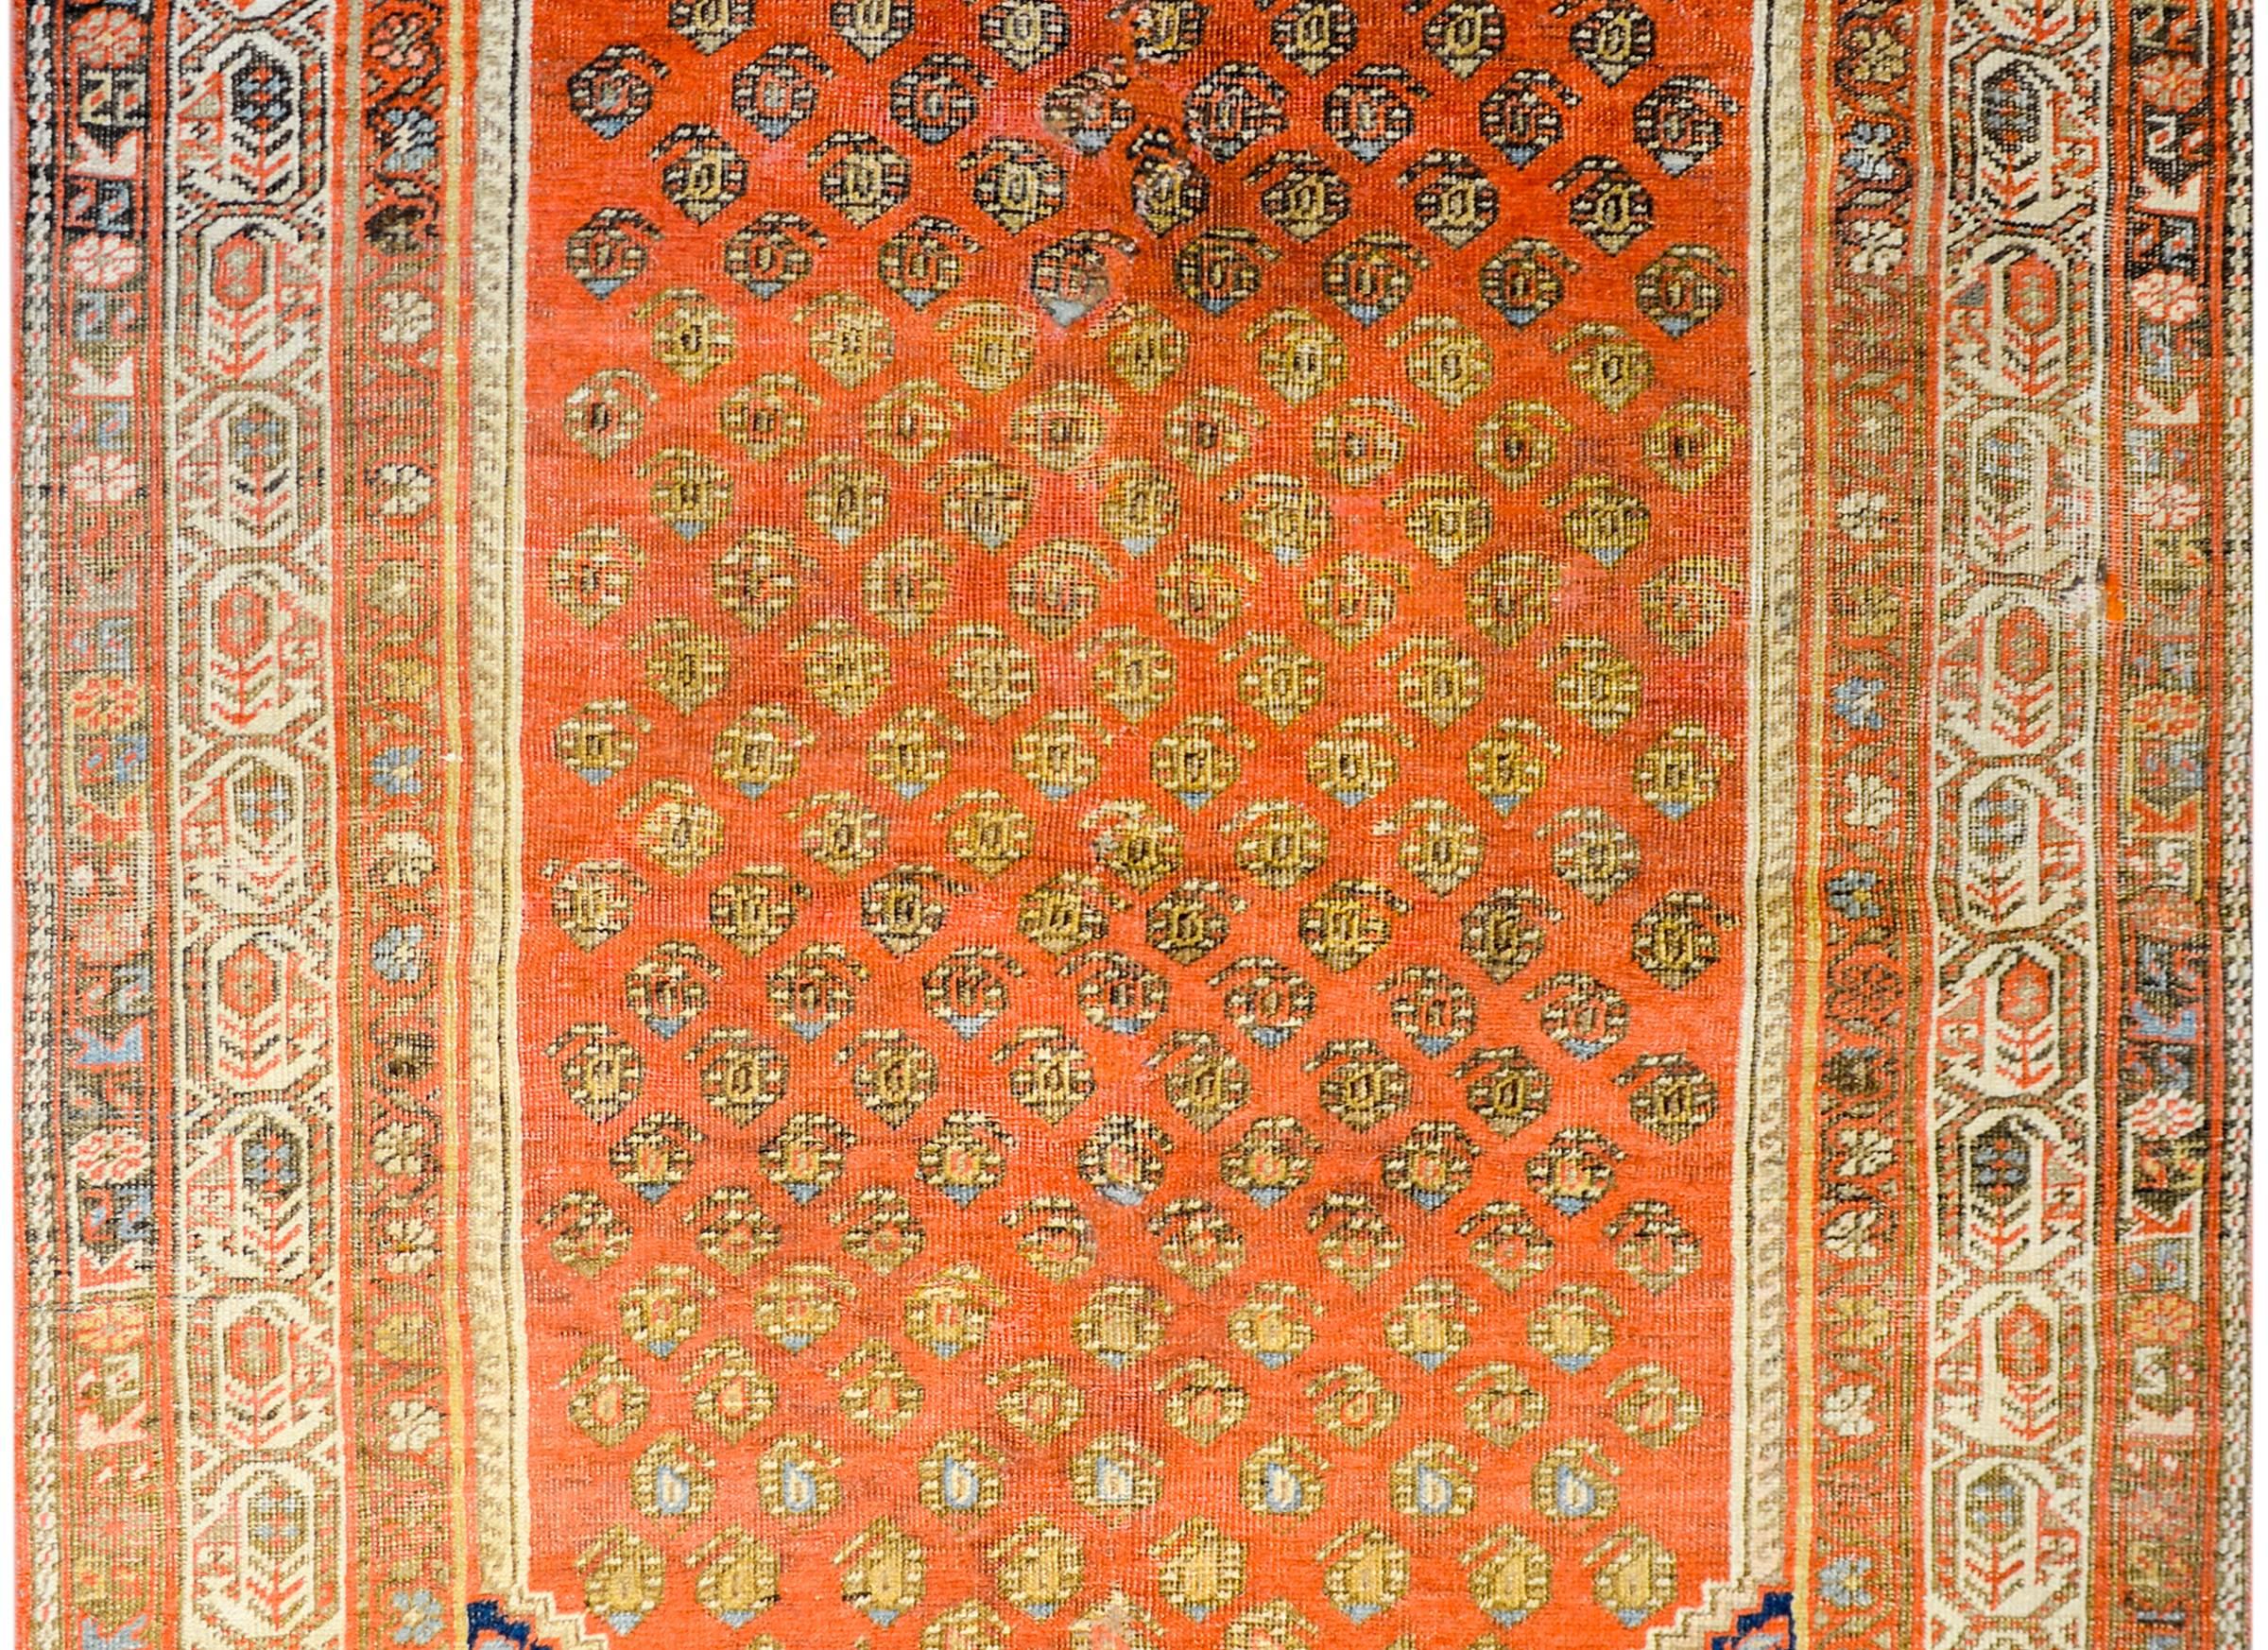 An early 20th century Persian Seraband rug with an amazing all-over paisley pattern woven in an incredible brilliant orange, gold, light indigo, and cream colored wool on a rusty orange colored wool background. The border is complex with multiple